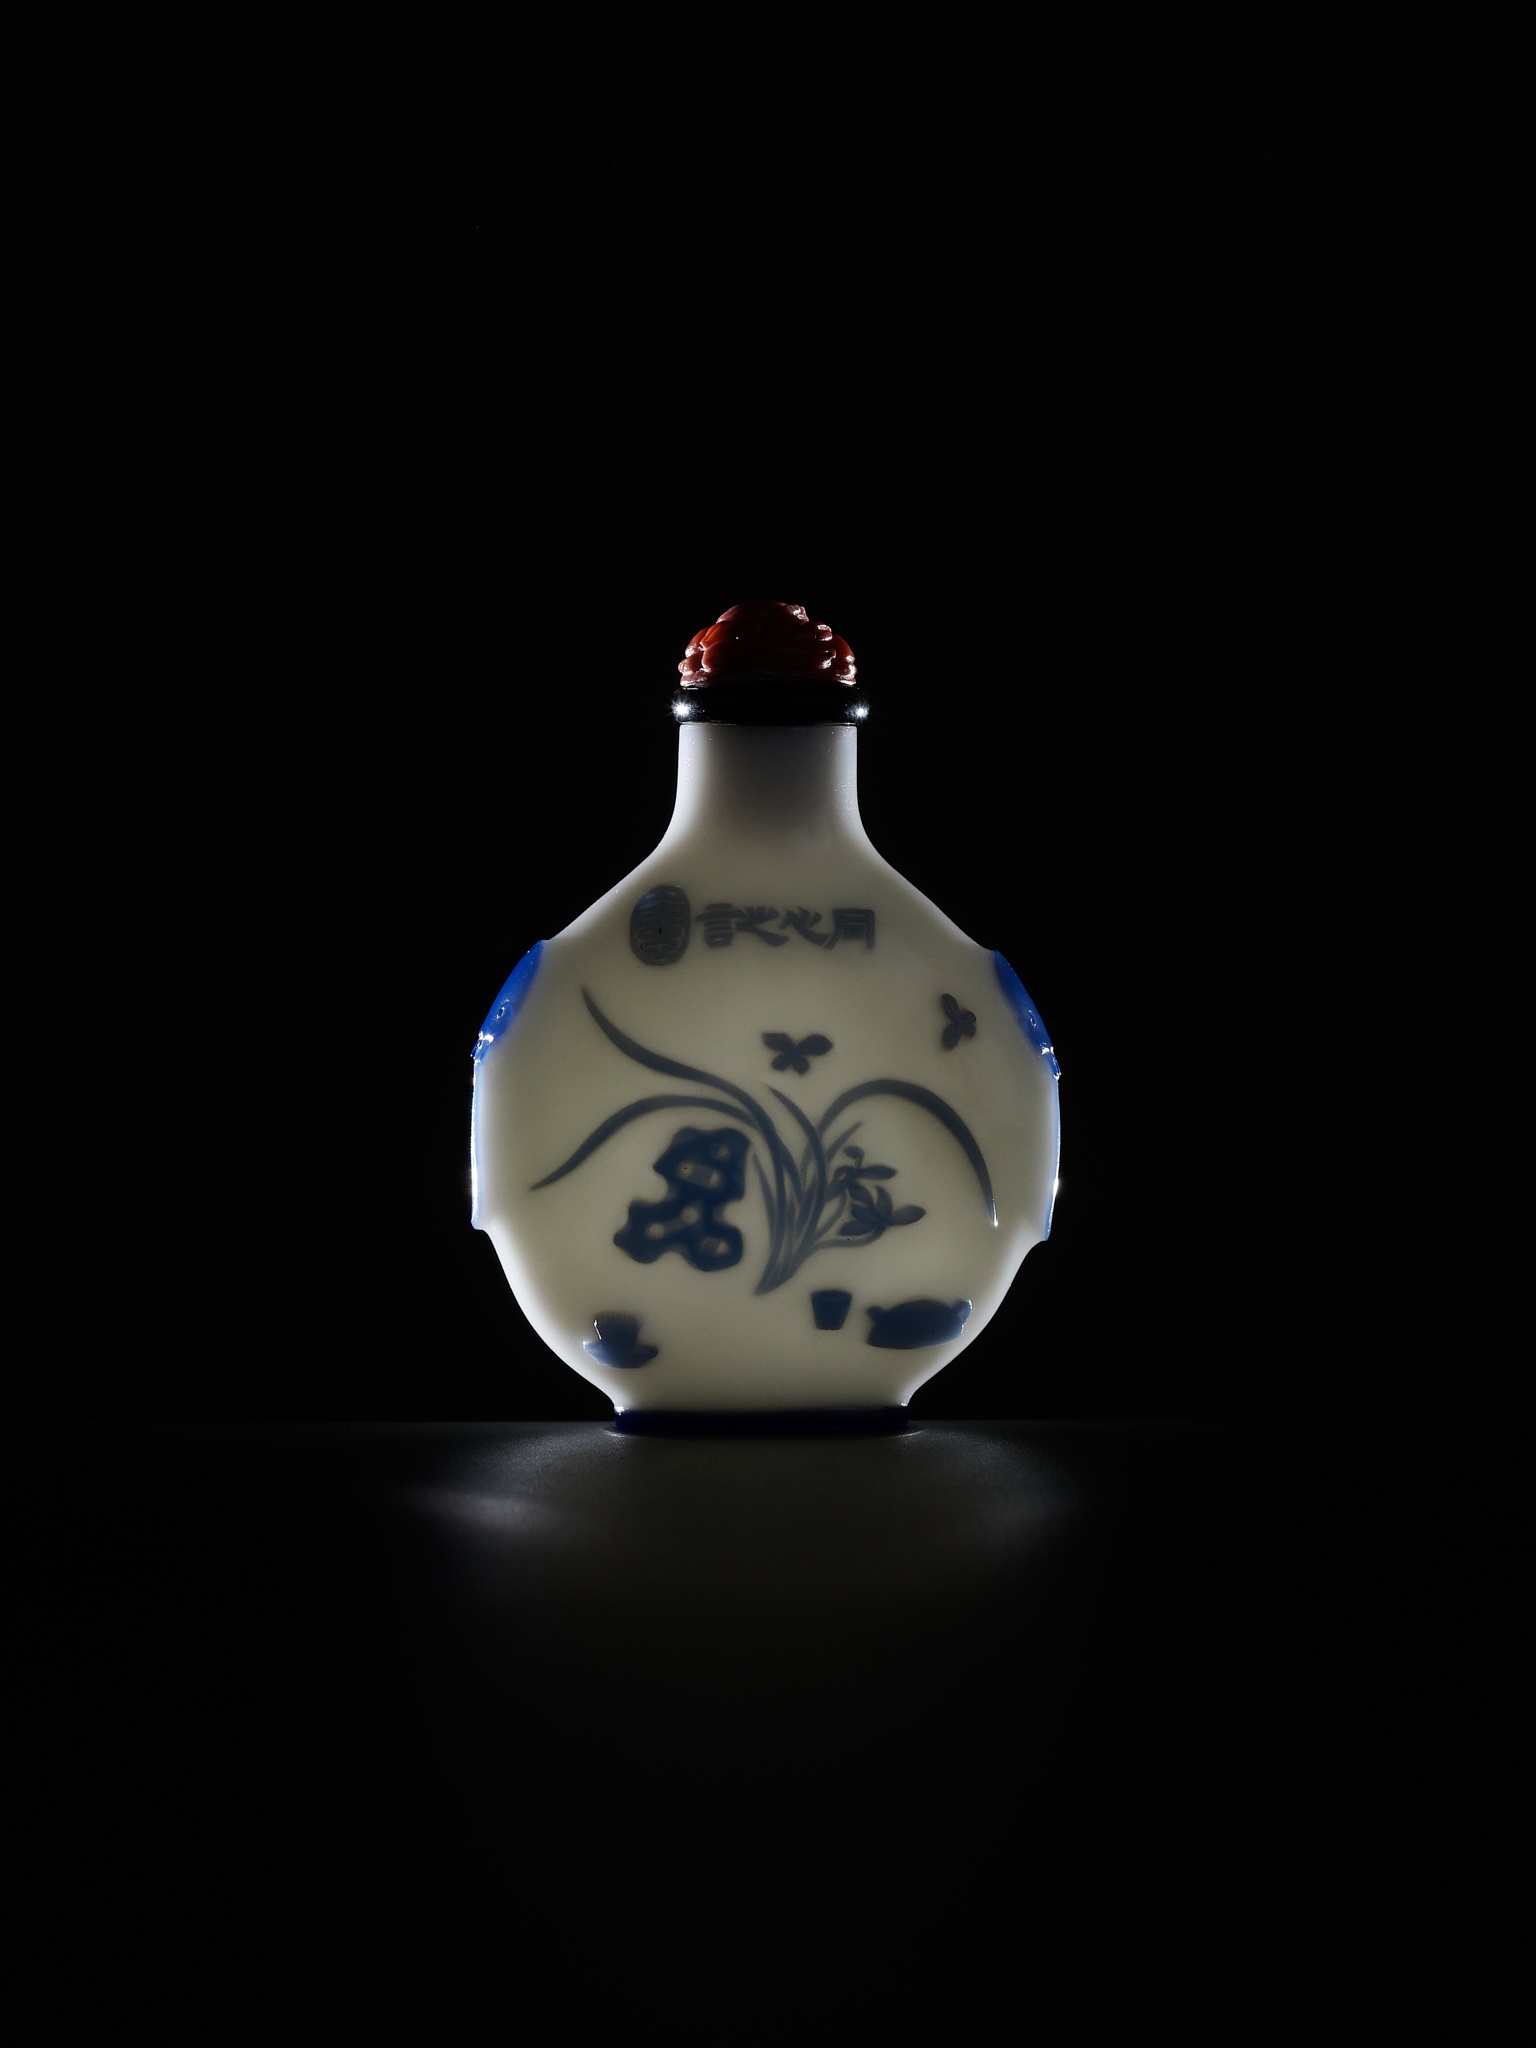 AN INSCRIBED SAPPHIRE-BLUE OVERLAY GLASS SNUFF BOTTLE, YANGZHOU SCHOOL, CHINA, 1800-1880 - Image 10 of 20